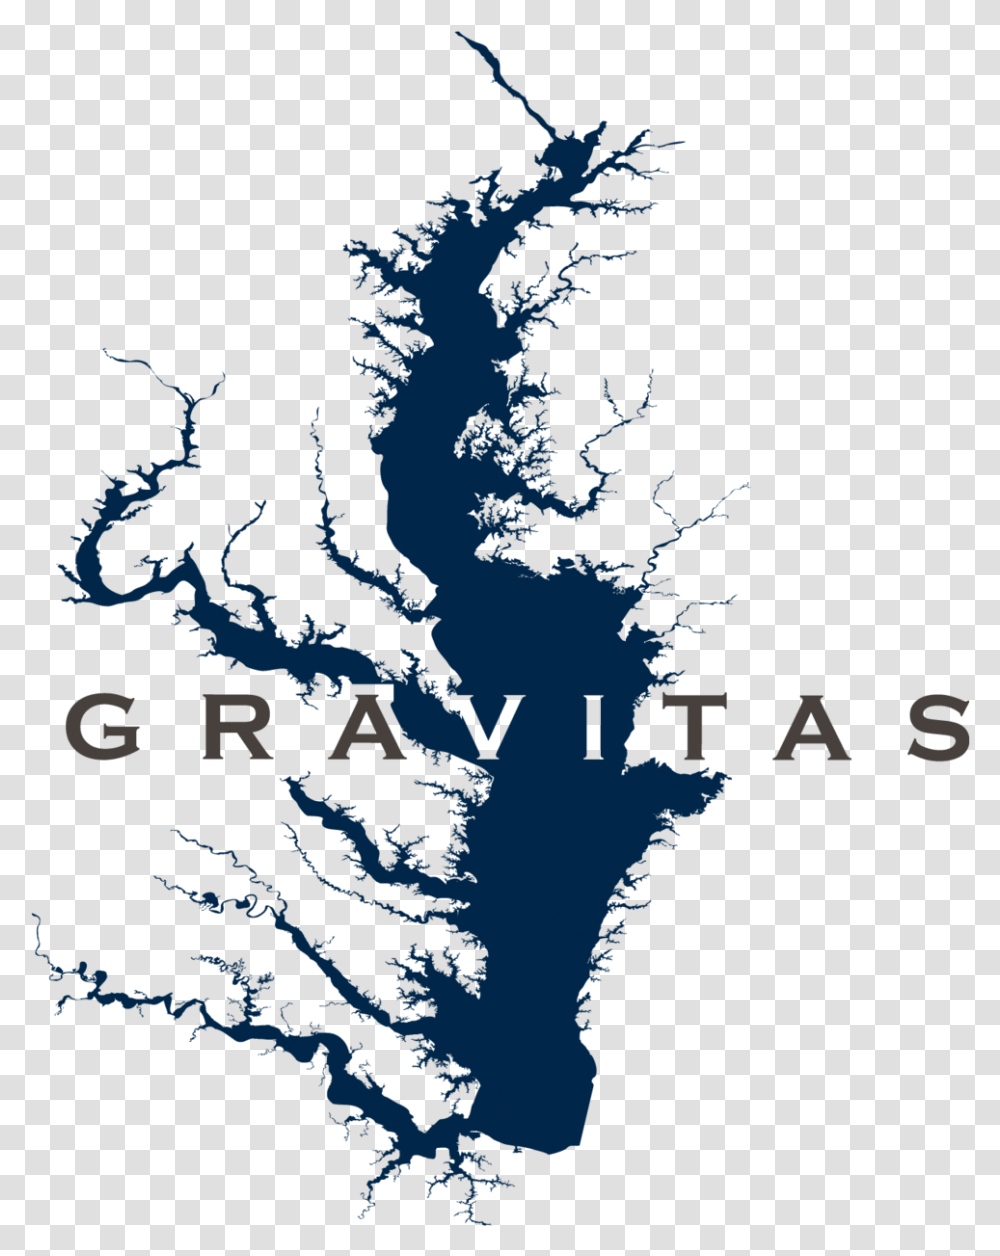 Gravitas Chesapeake Bay Dead Zones, Text, Poster, Nature, Outdoors Transparent Png